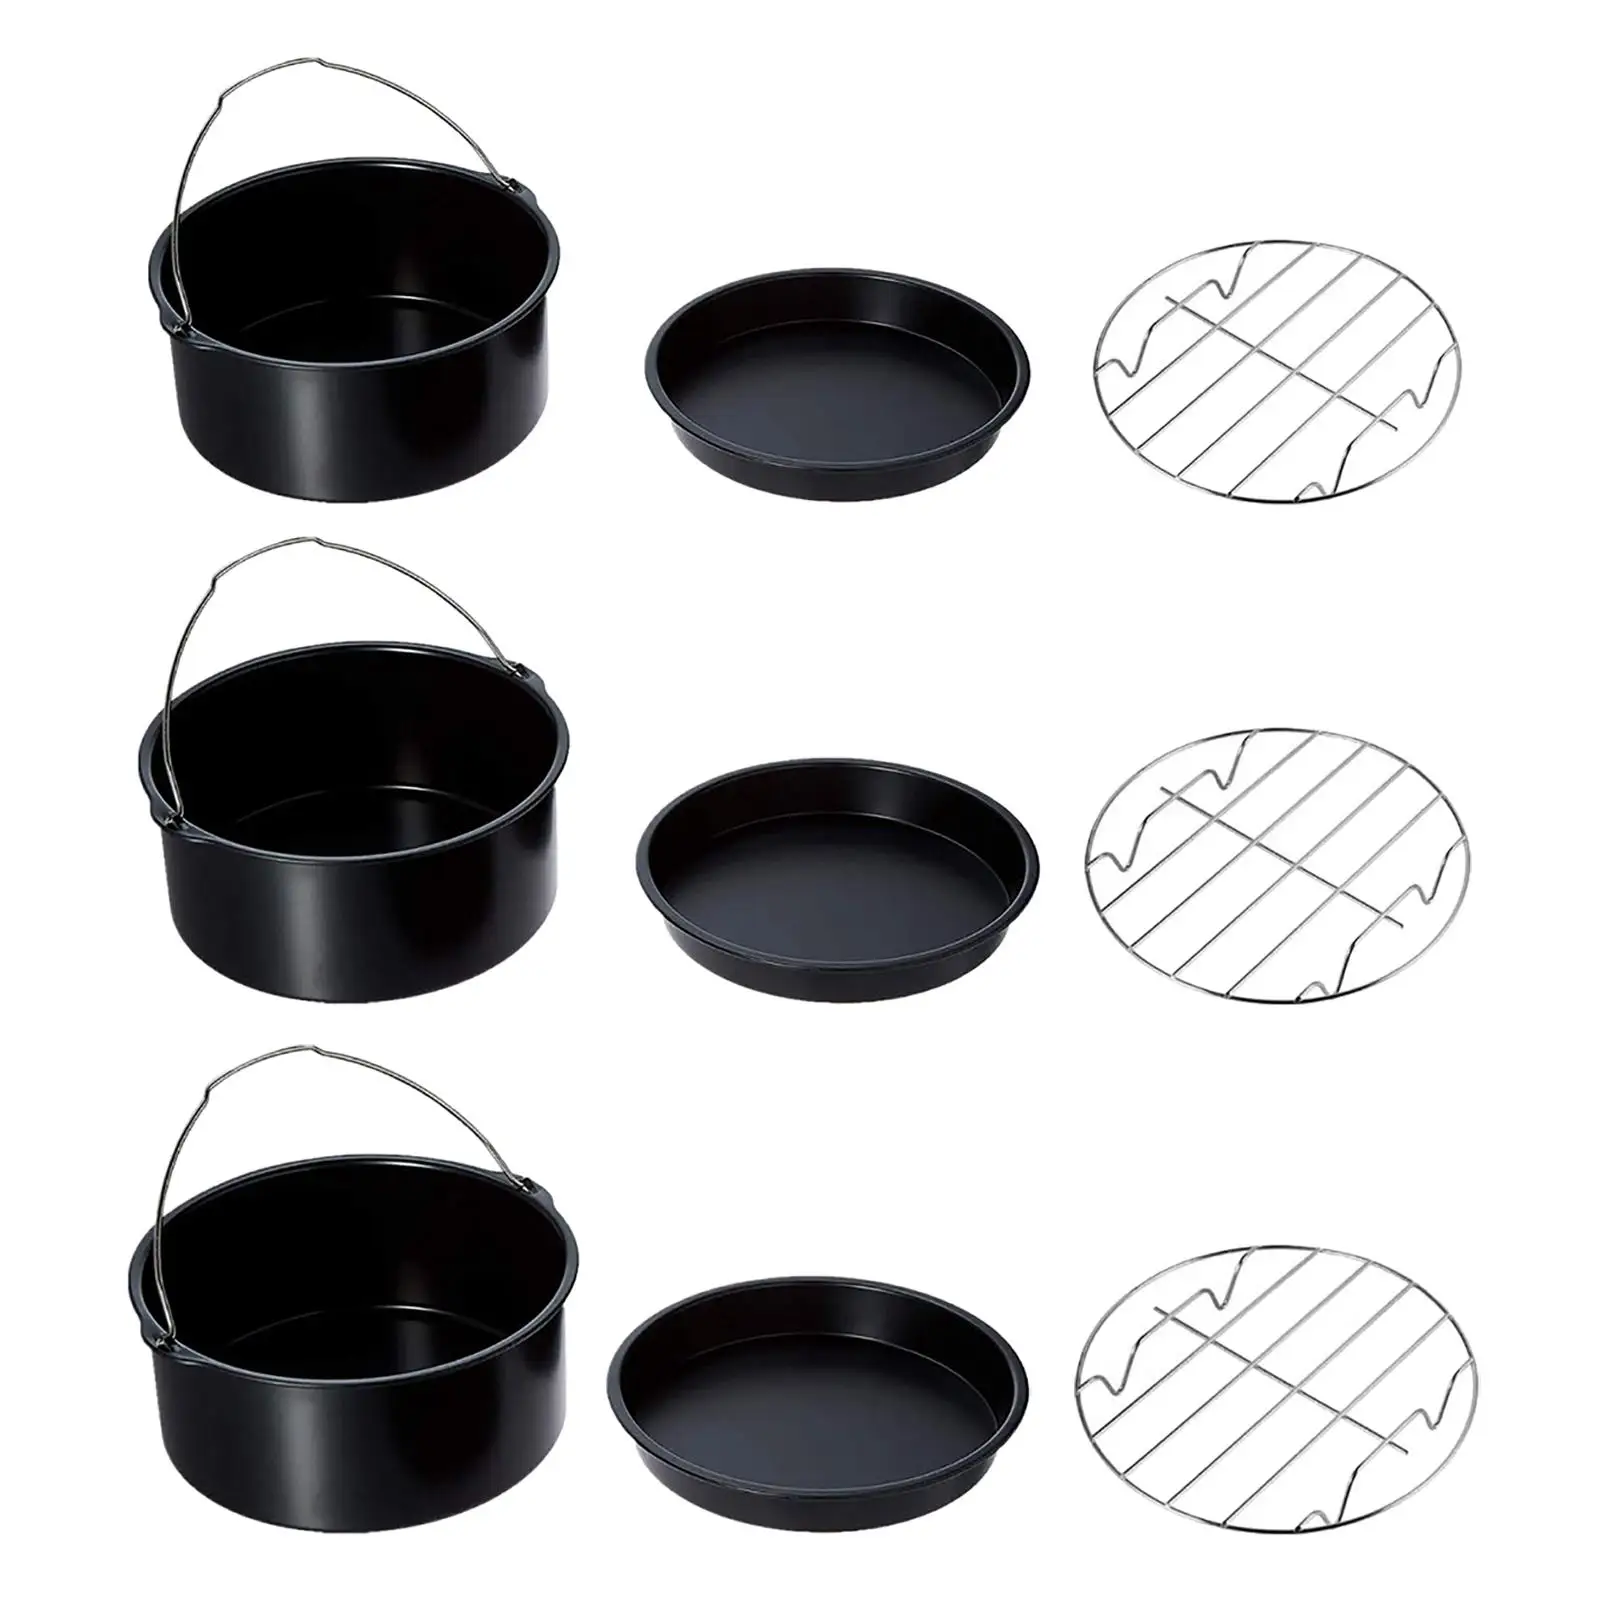 3x Durable Air Fryer Accessories Non-Stick Grill Pizza Pan Cake Basket Skewer Rack for Household Cooking Baking Kitchen BBQ